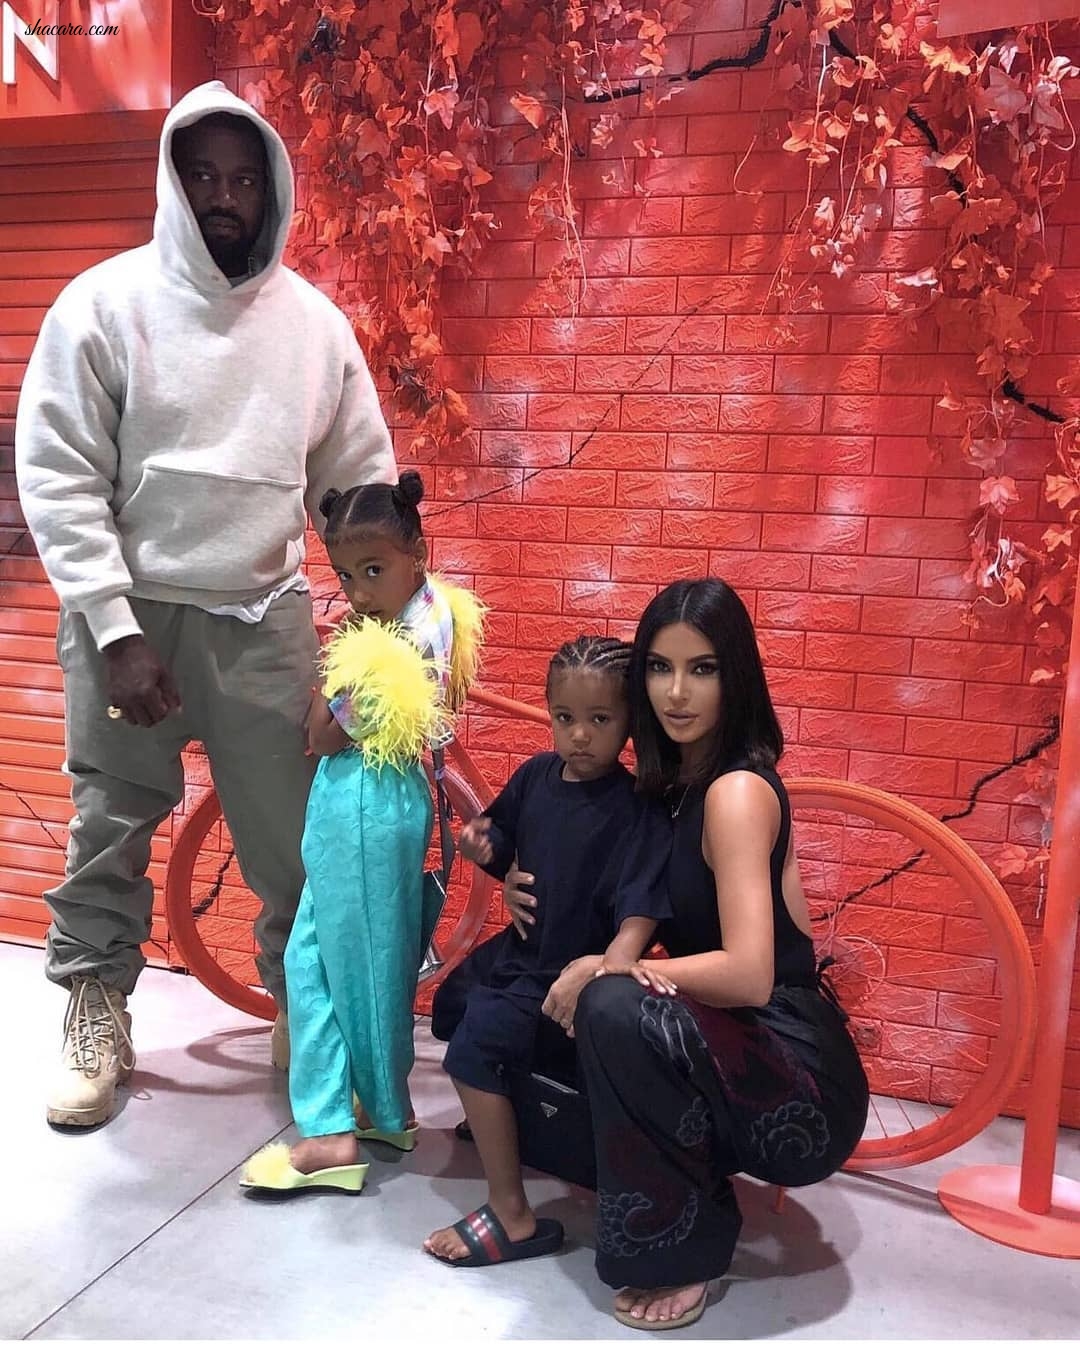 Kanye West & Kim Kardashian Drop Fabulous Images Of Their Children In Japan And It’s Beyond Beautiful